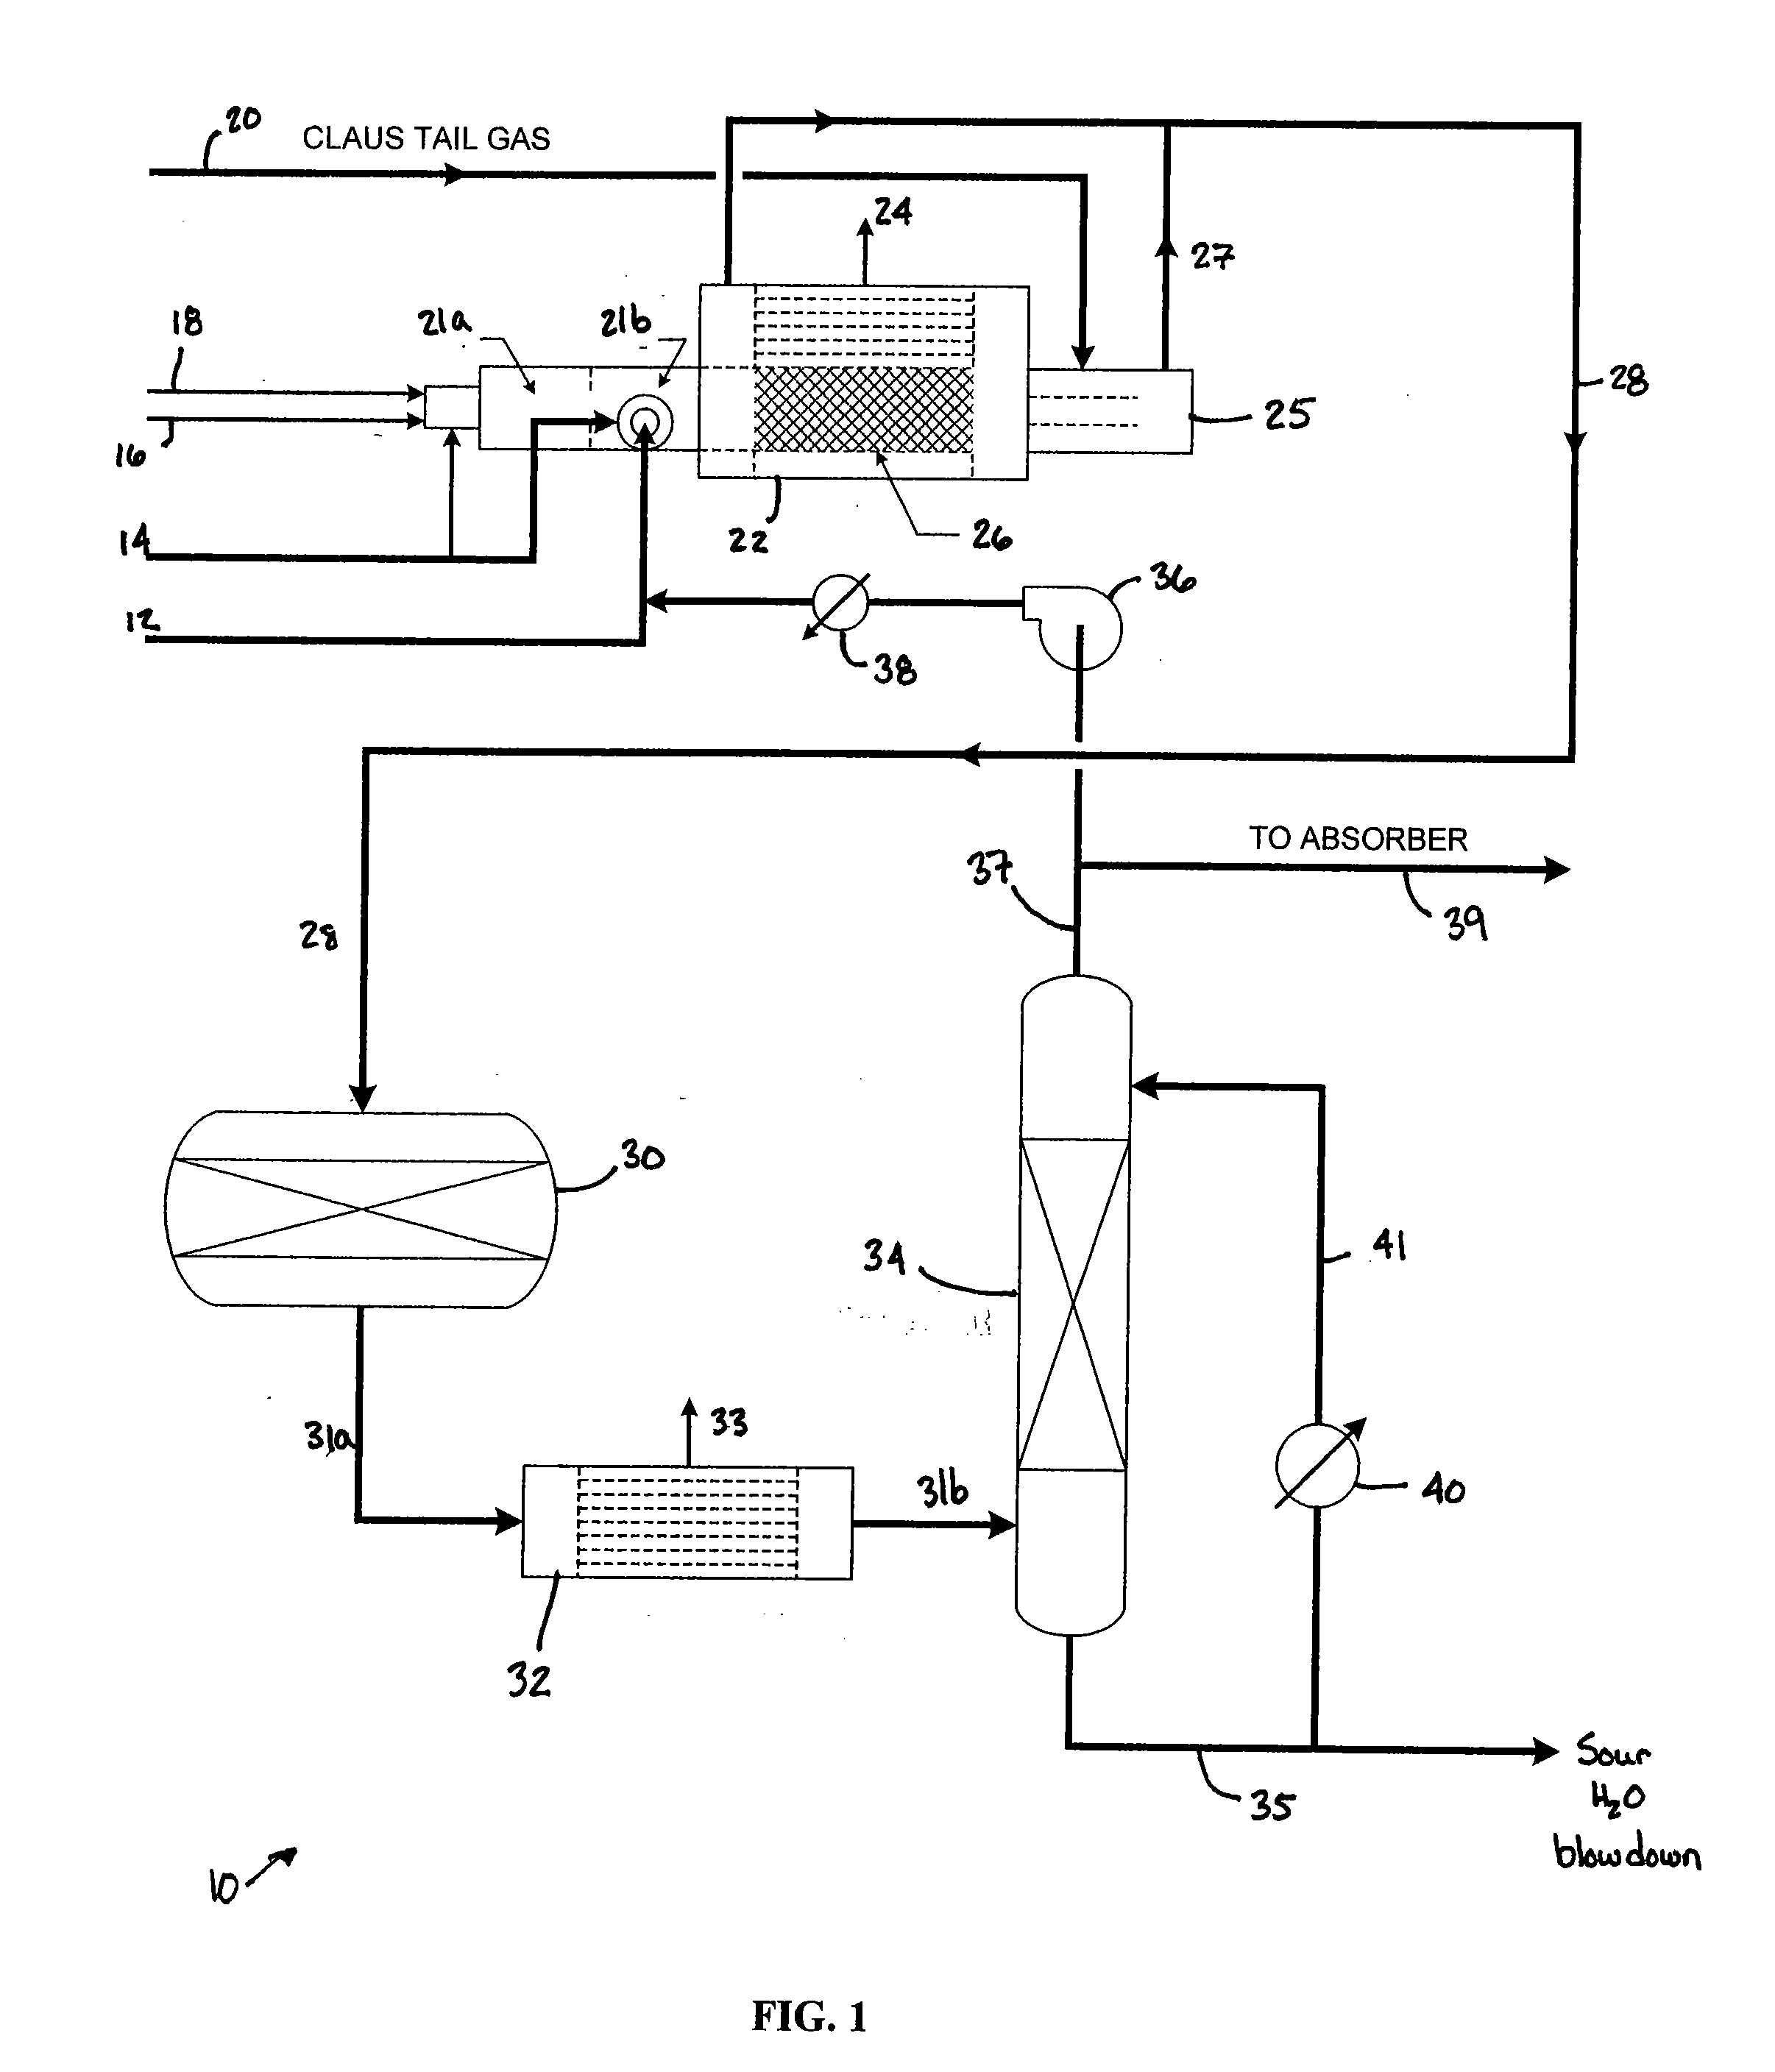 Ammonia Destruction Methods for Use in a Claus Tail Gas Treating Unit